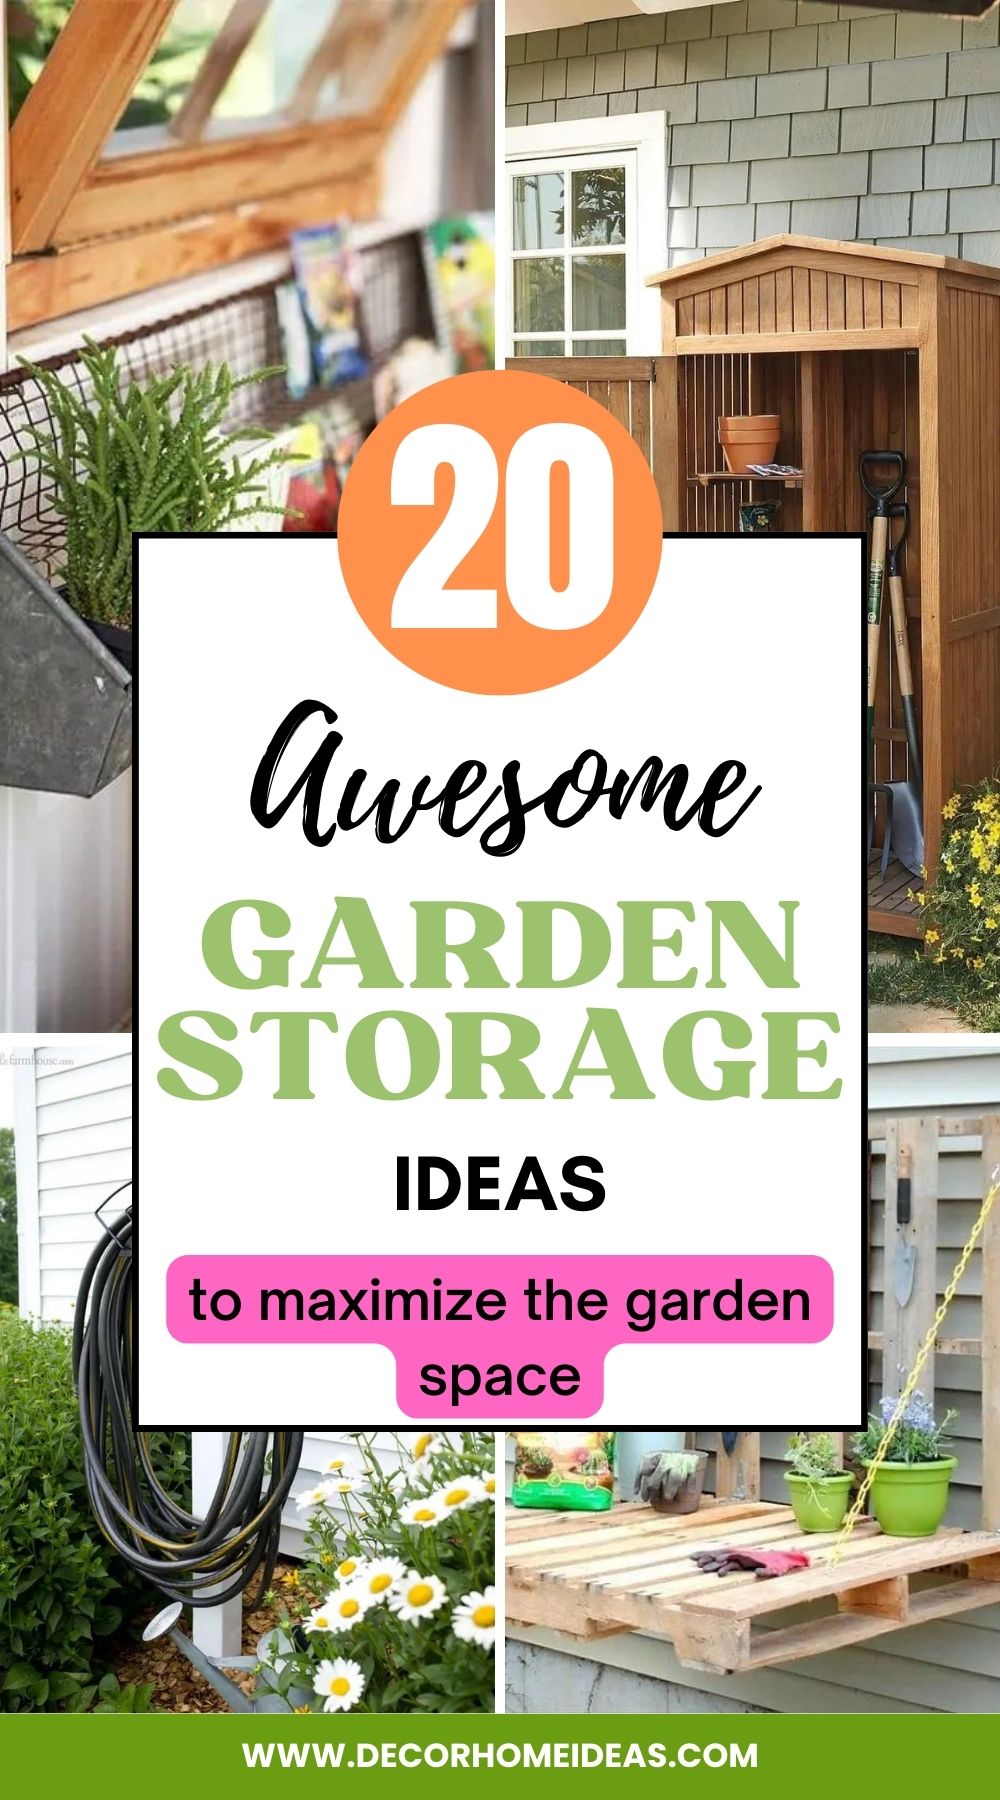 Explore innovative garden storage ideas to declutter and beautify your outdoor space. Discover smart solutions for maximizing organization and enjoying a more organized and inviting garden.